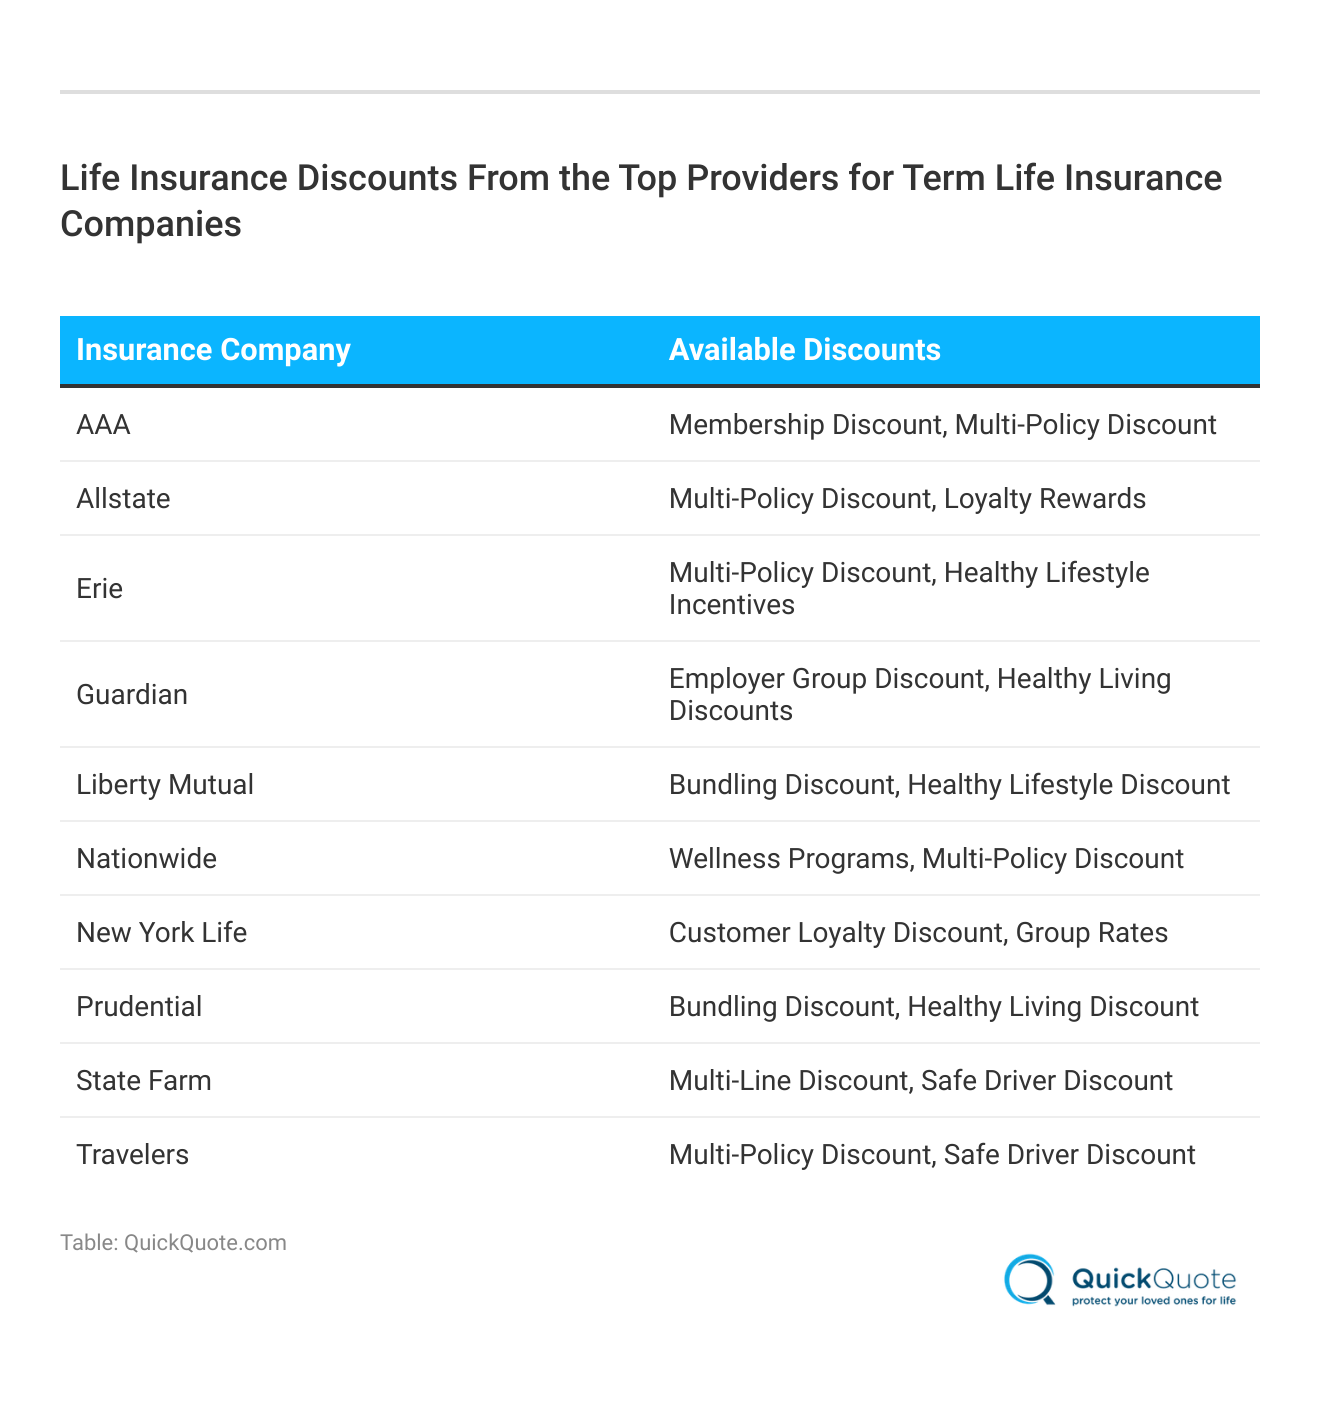 <h3>Life Insurance Discounts From the Top Providers for Term Life Insurance Companies</h3>